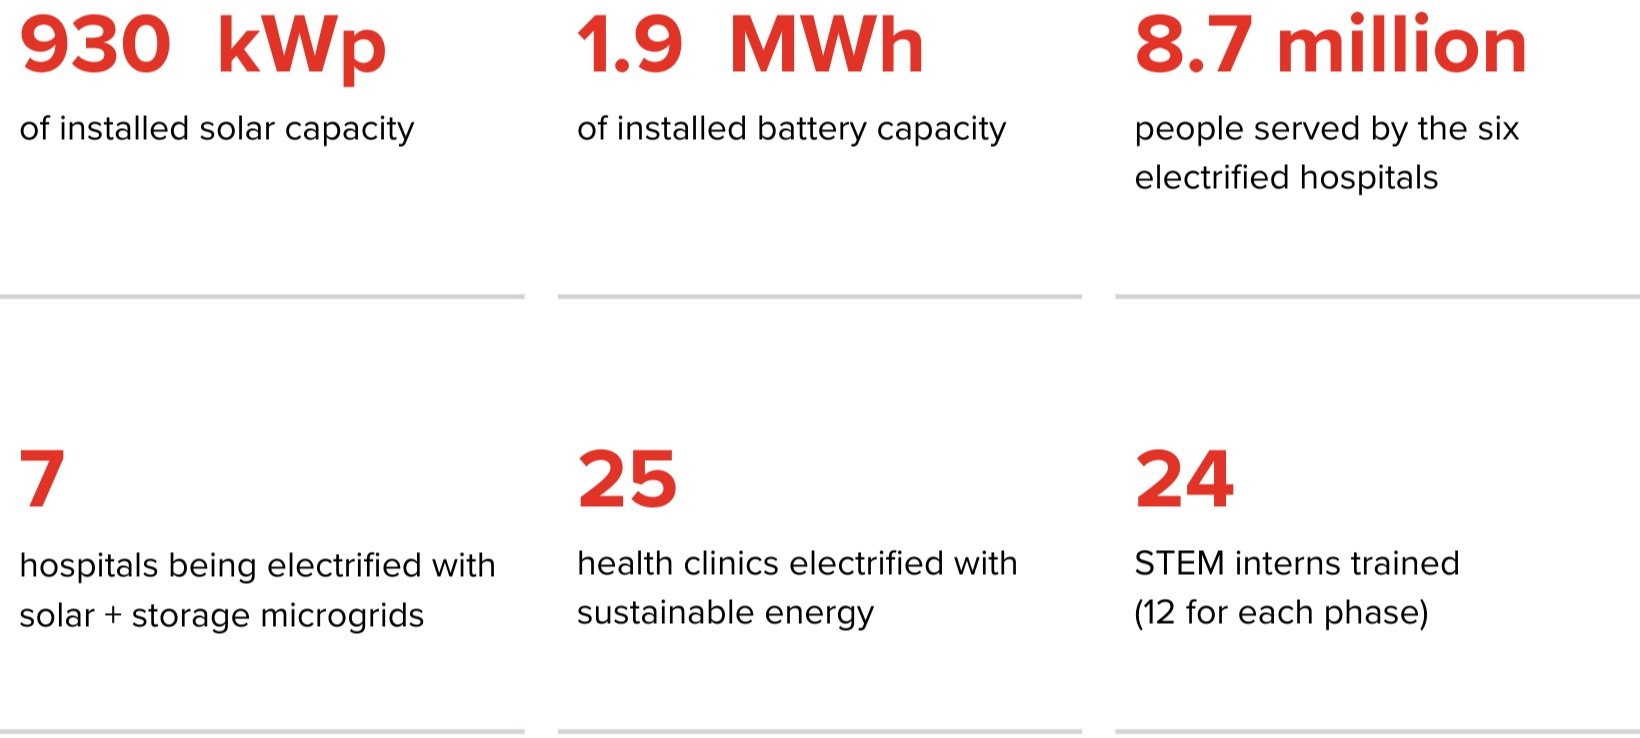 9+Million+People+served+by+the+six+electrified+hospitals+%28Phase+1%29+%288%29.jpg